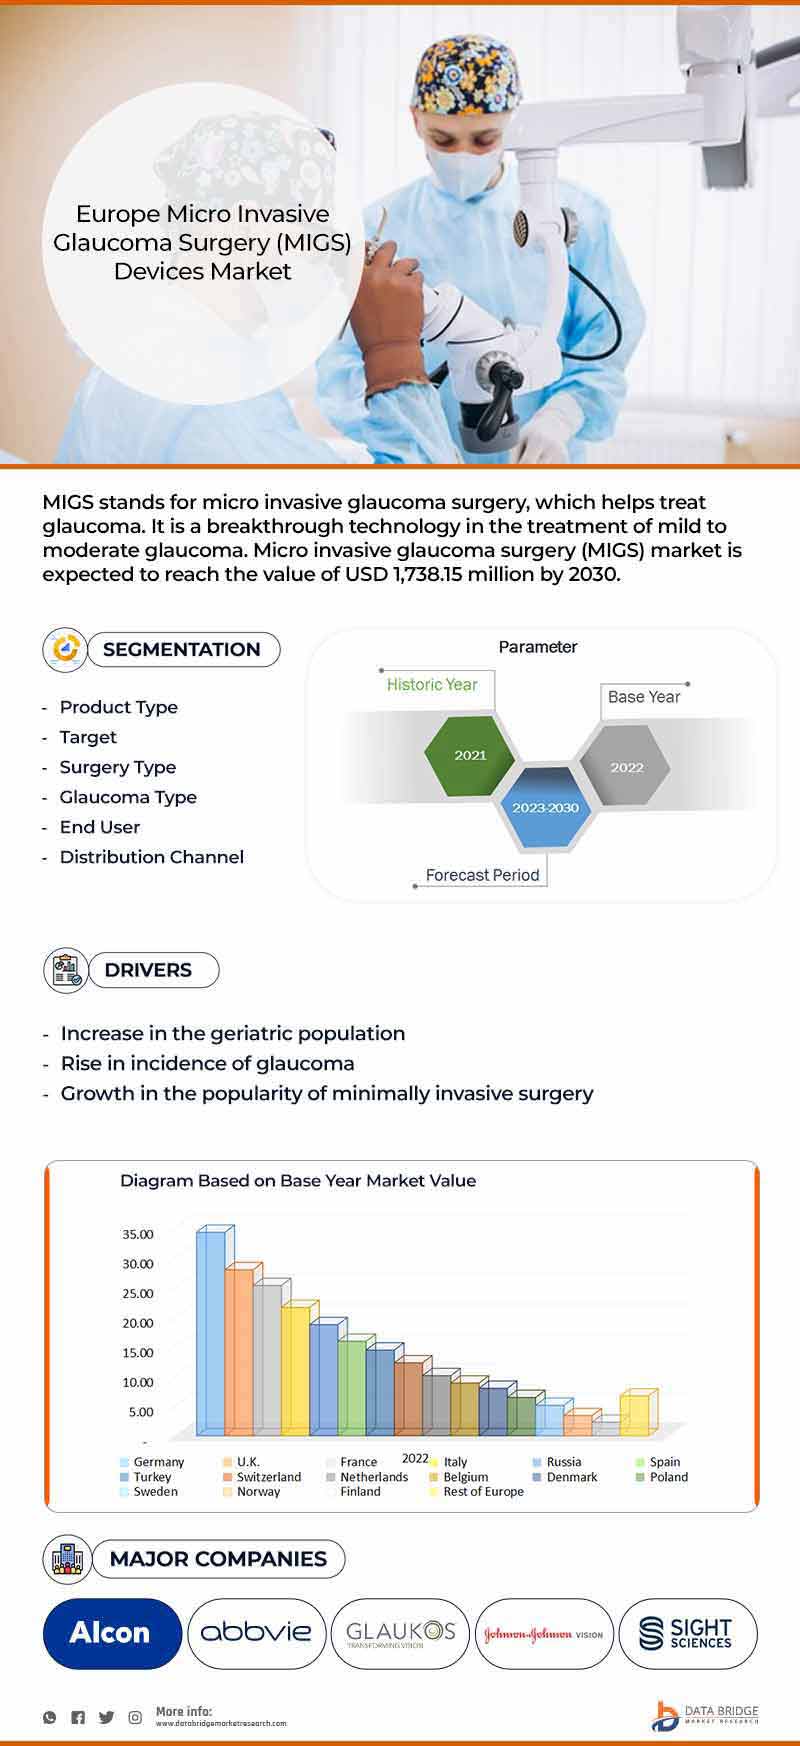 Europe Micro Invasive Glaucoma Surgery (MIGS) Devices Market